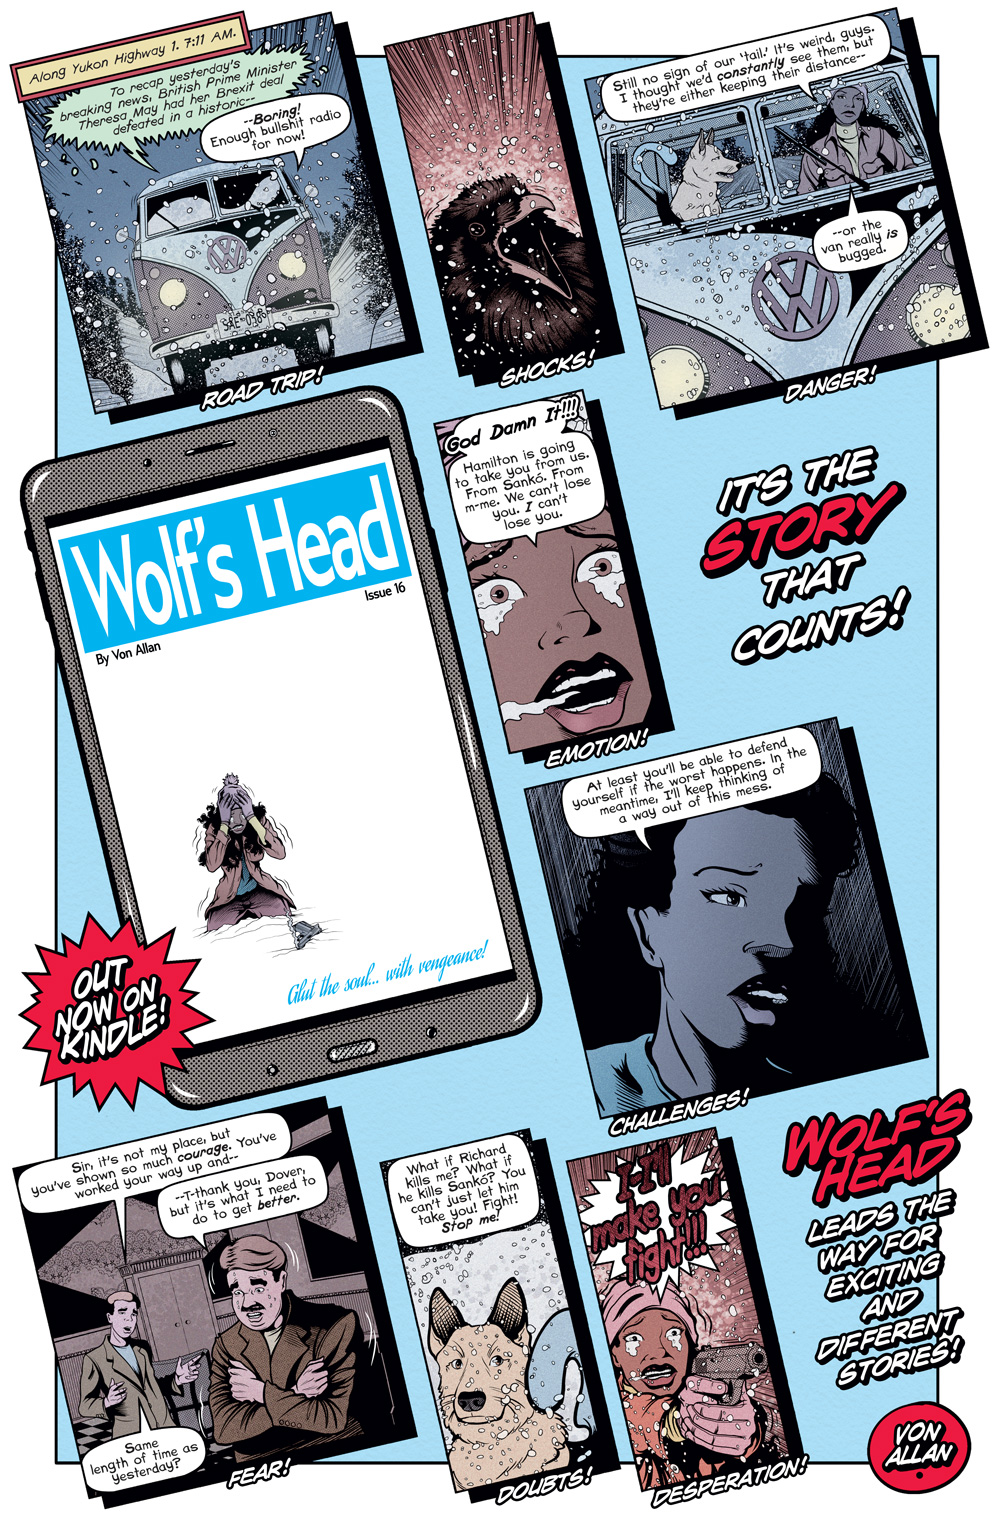 Teaser image for Wolf's Head Issue 16